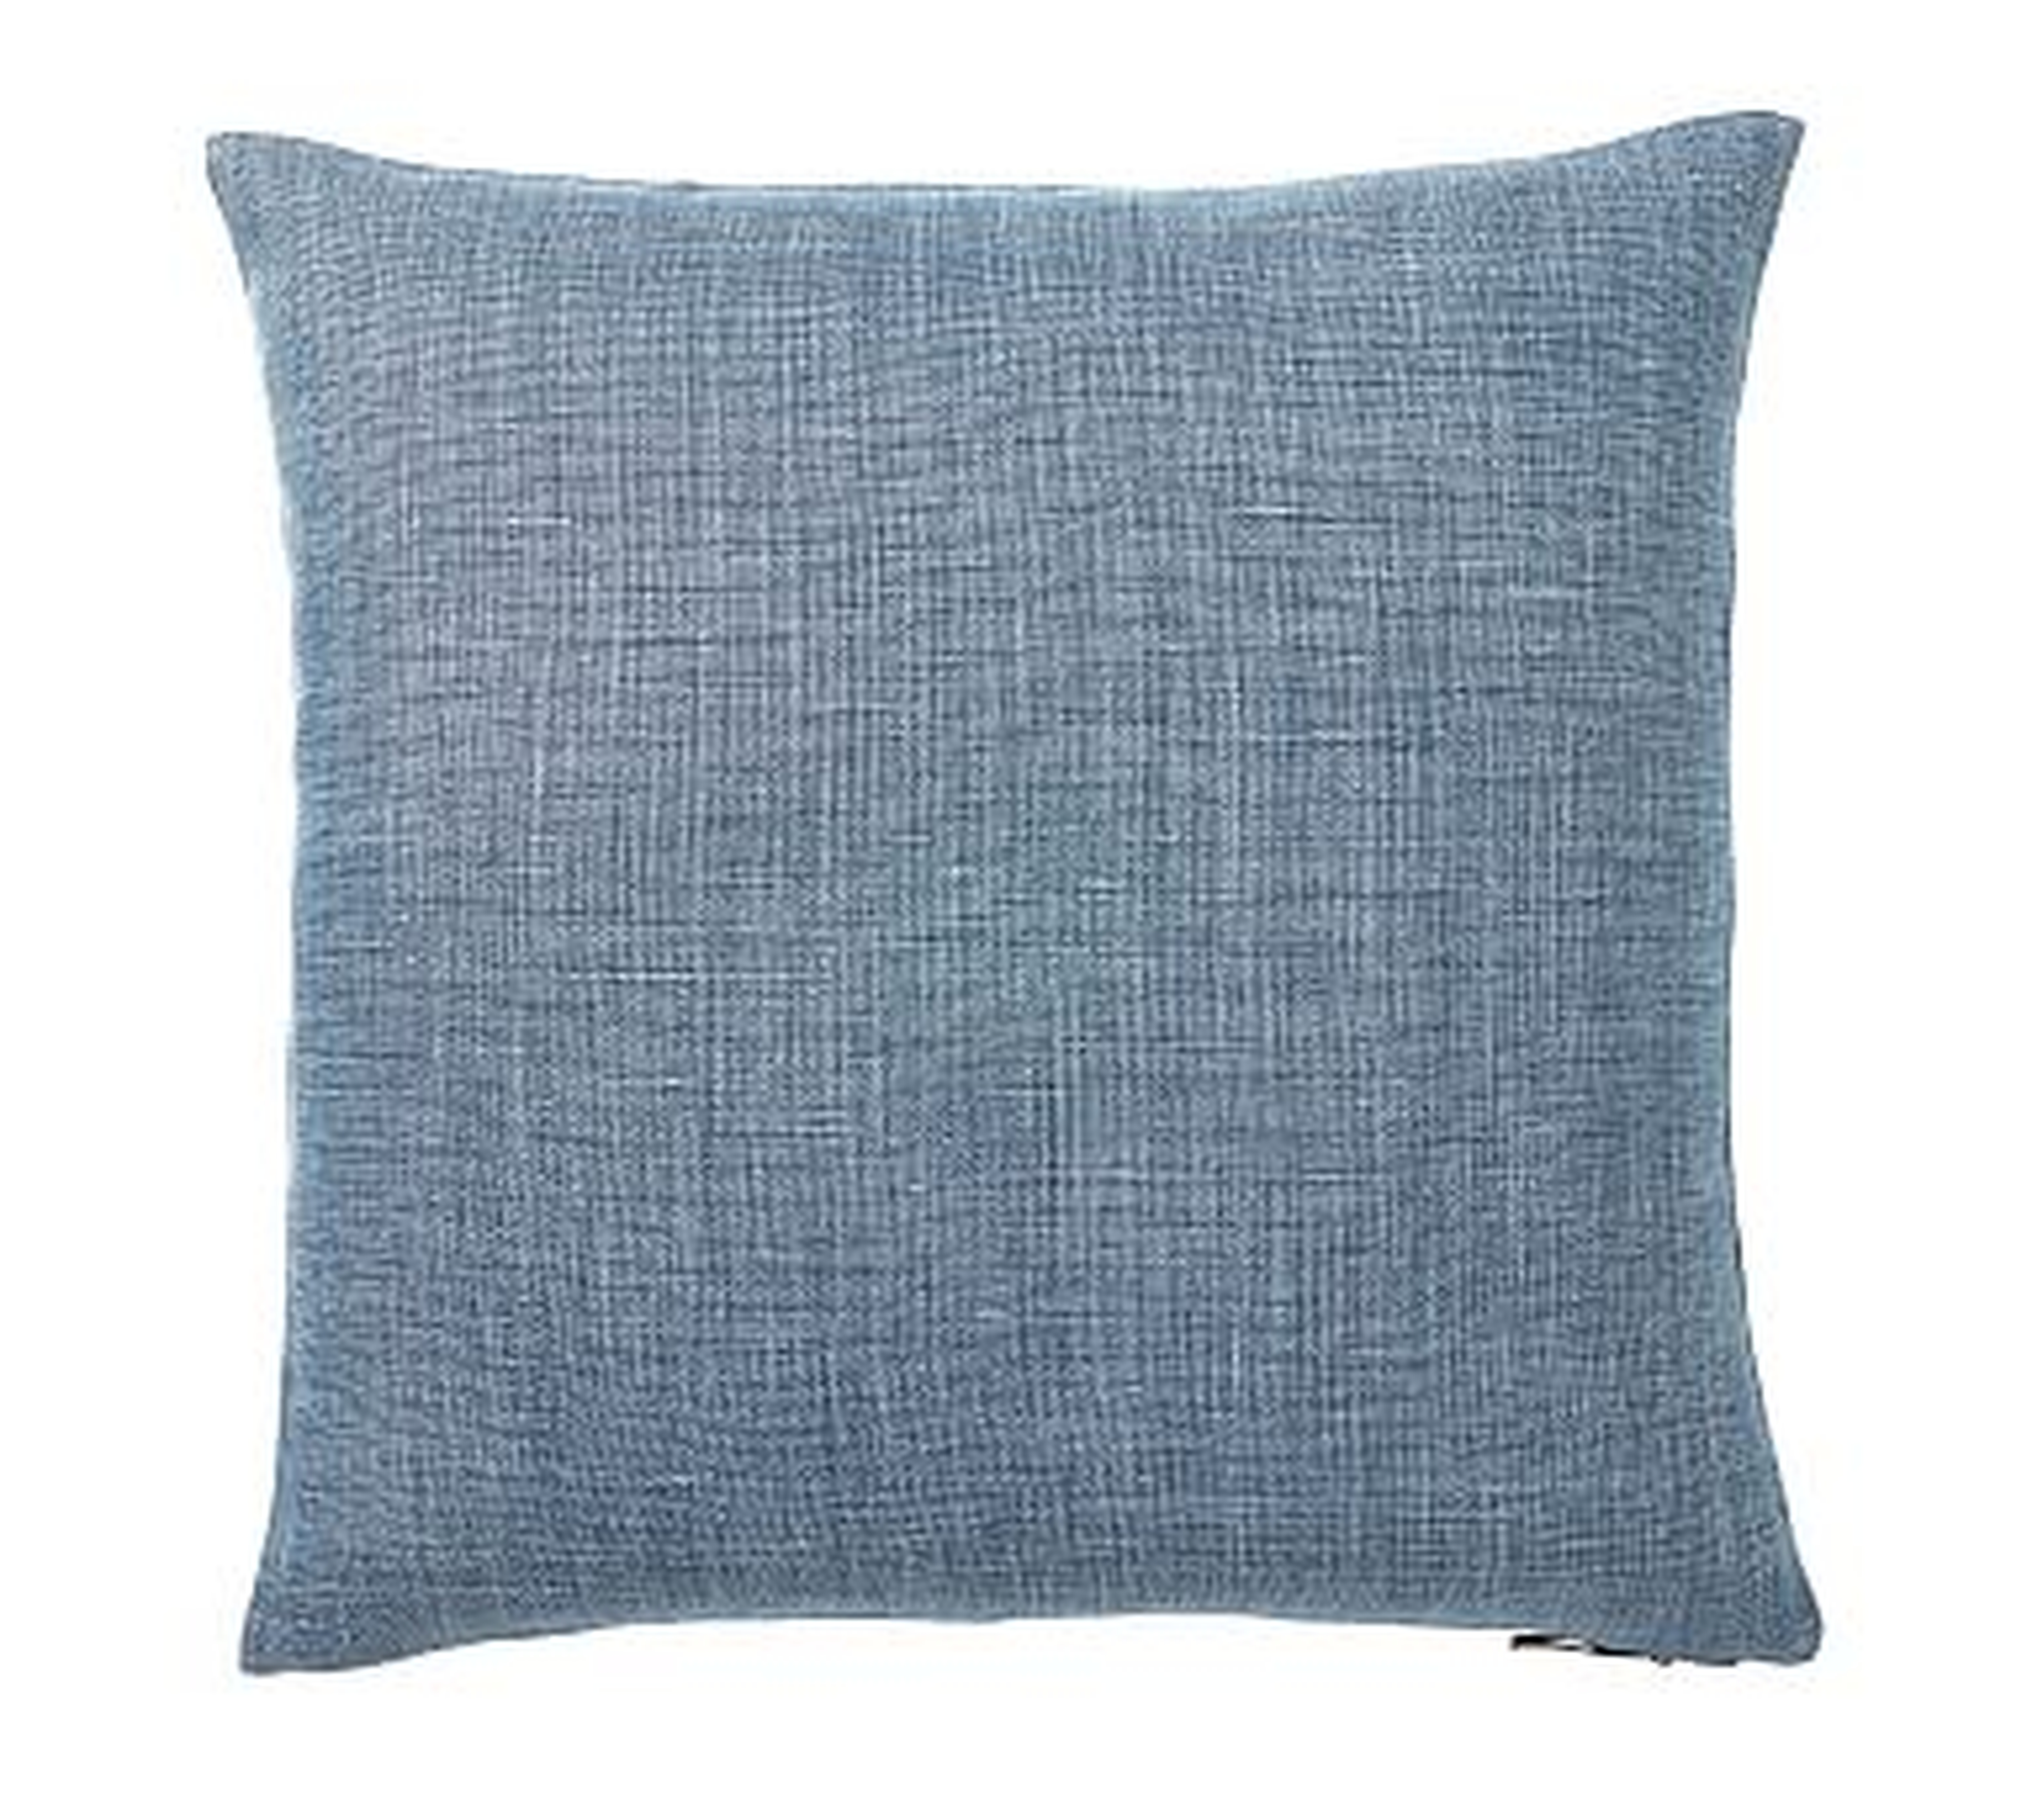 Libeco Linen Pillow Cover, 24", Midnight - Pottery Barn